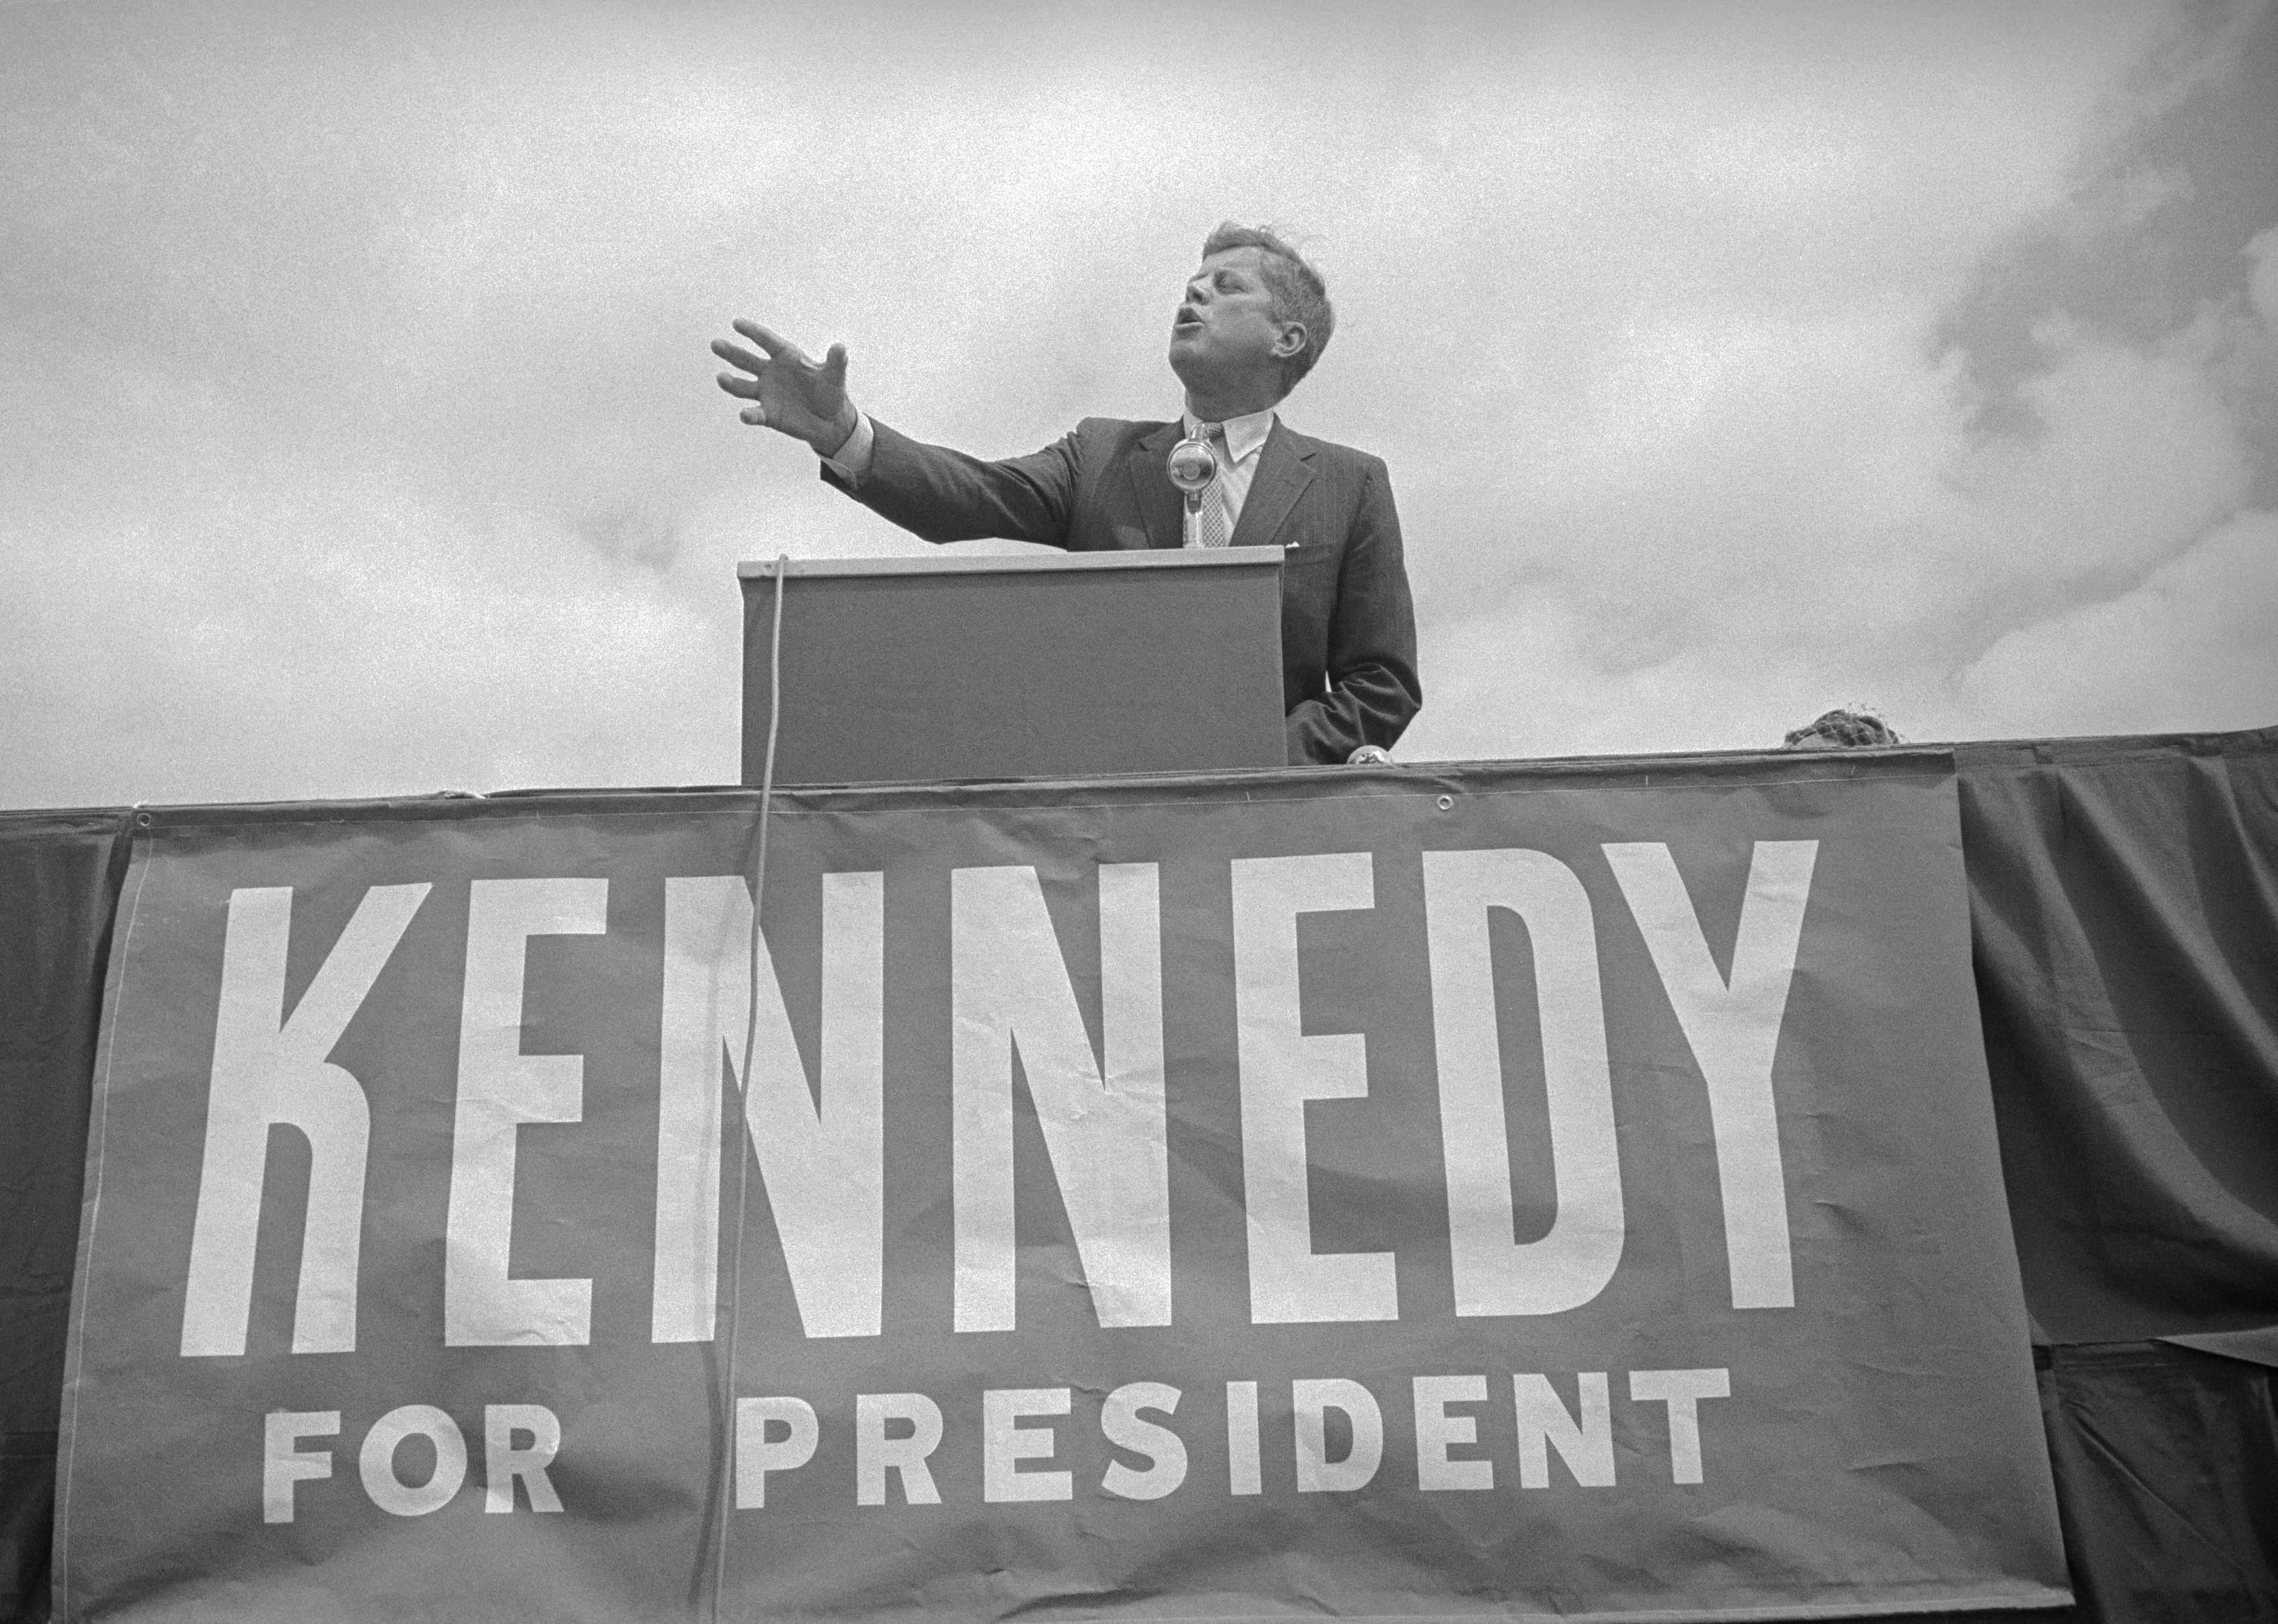 John F. Kennedy giving a campaign speech onstage.